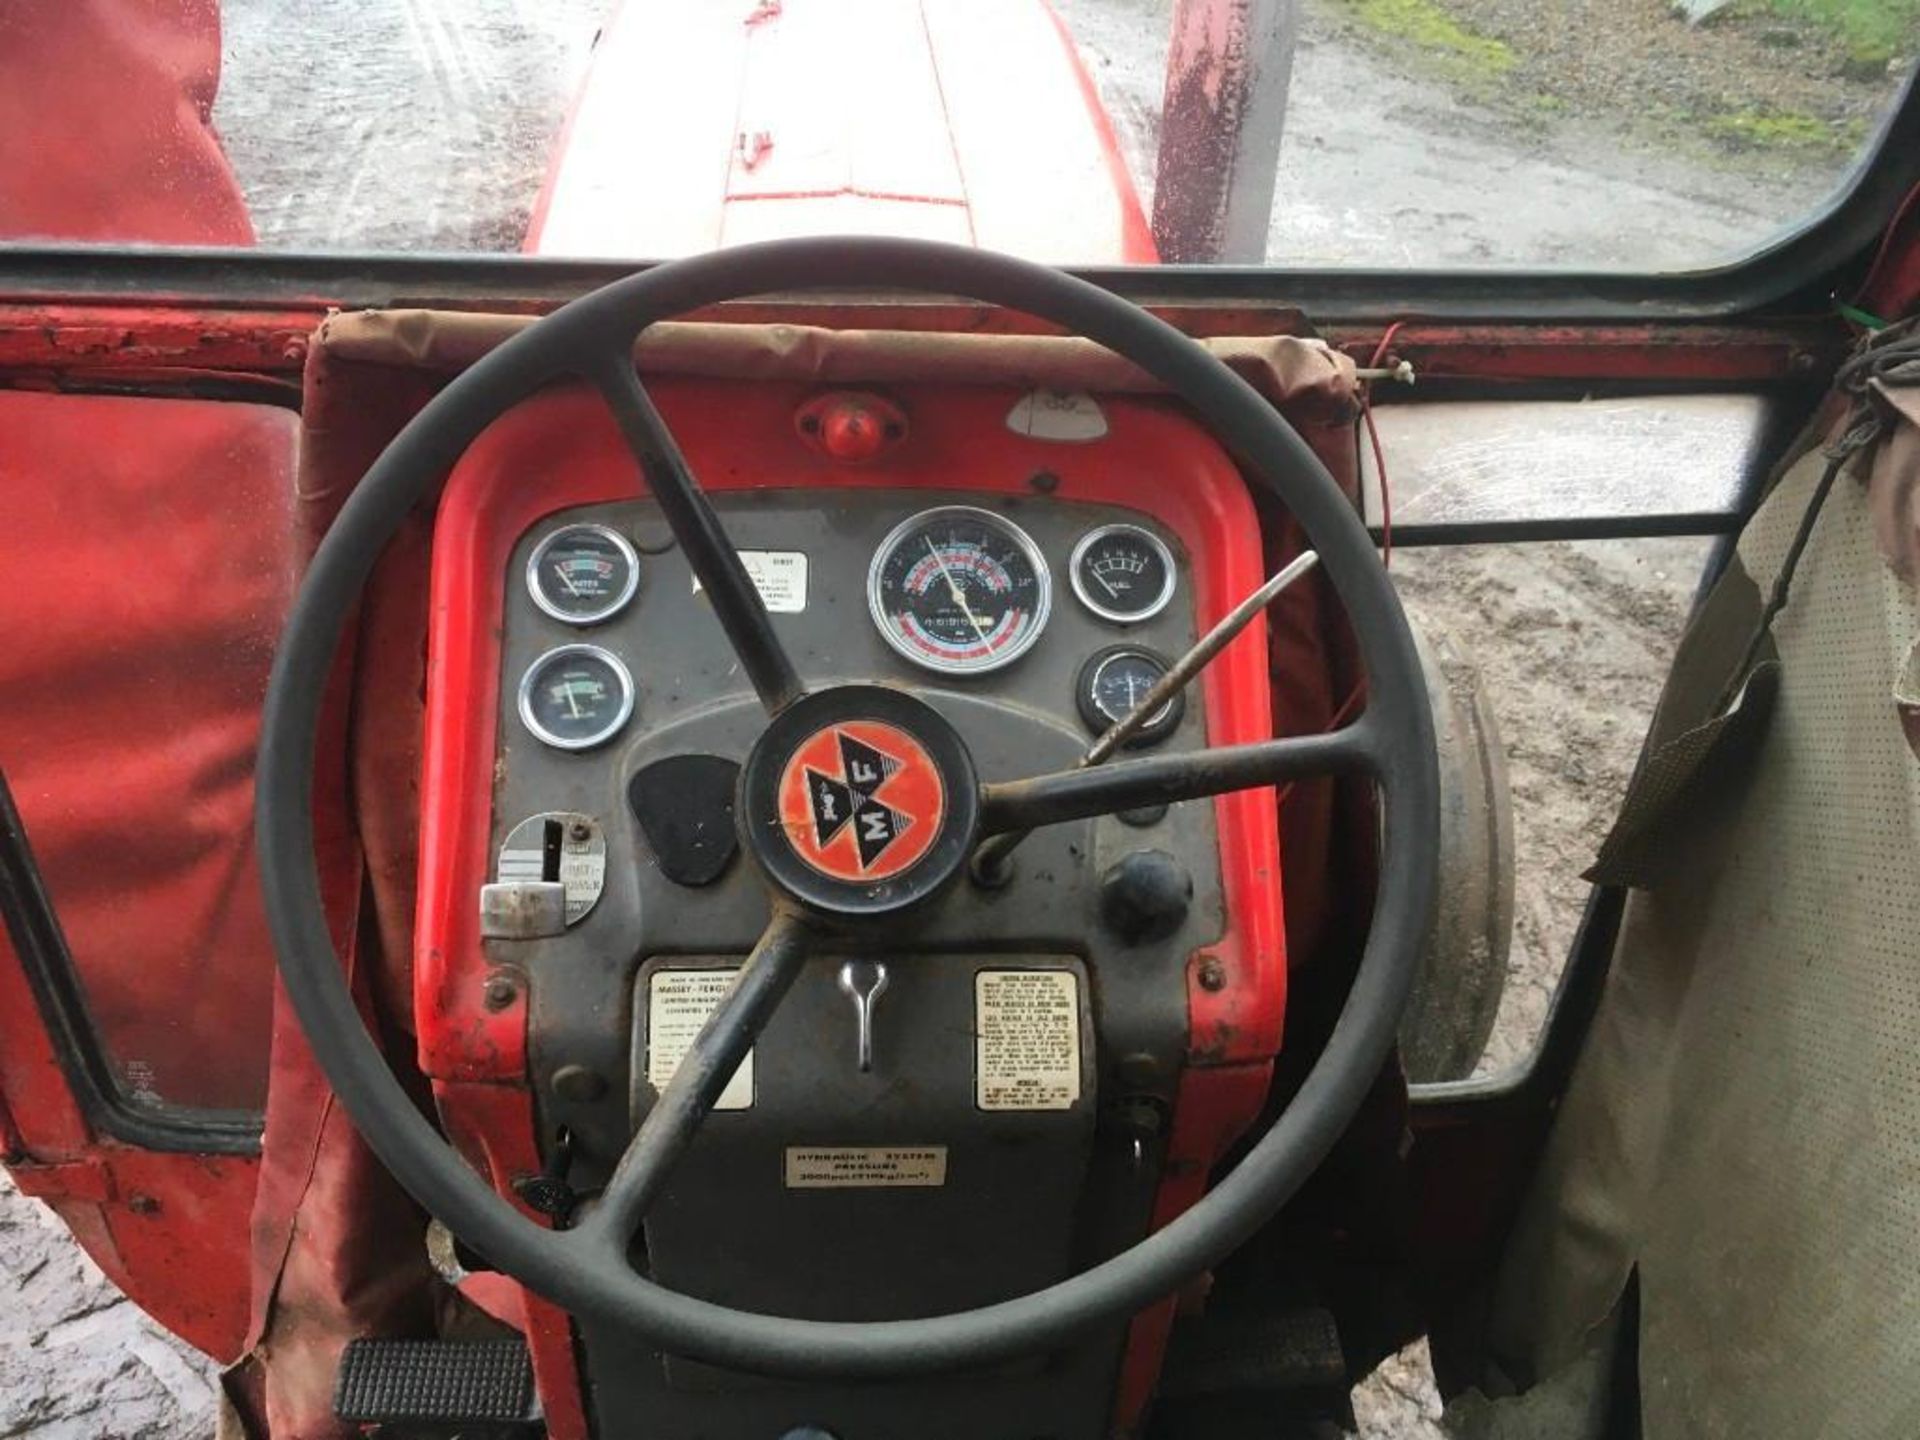 1974 Massey Ferguson 188 MultiPower tractor, 3 spool valves, rear link arms and pickup hitch, benefi - Image 18 of 21